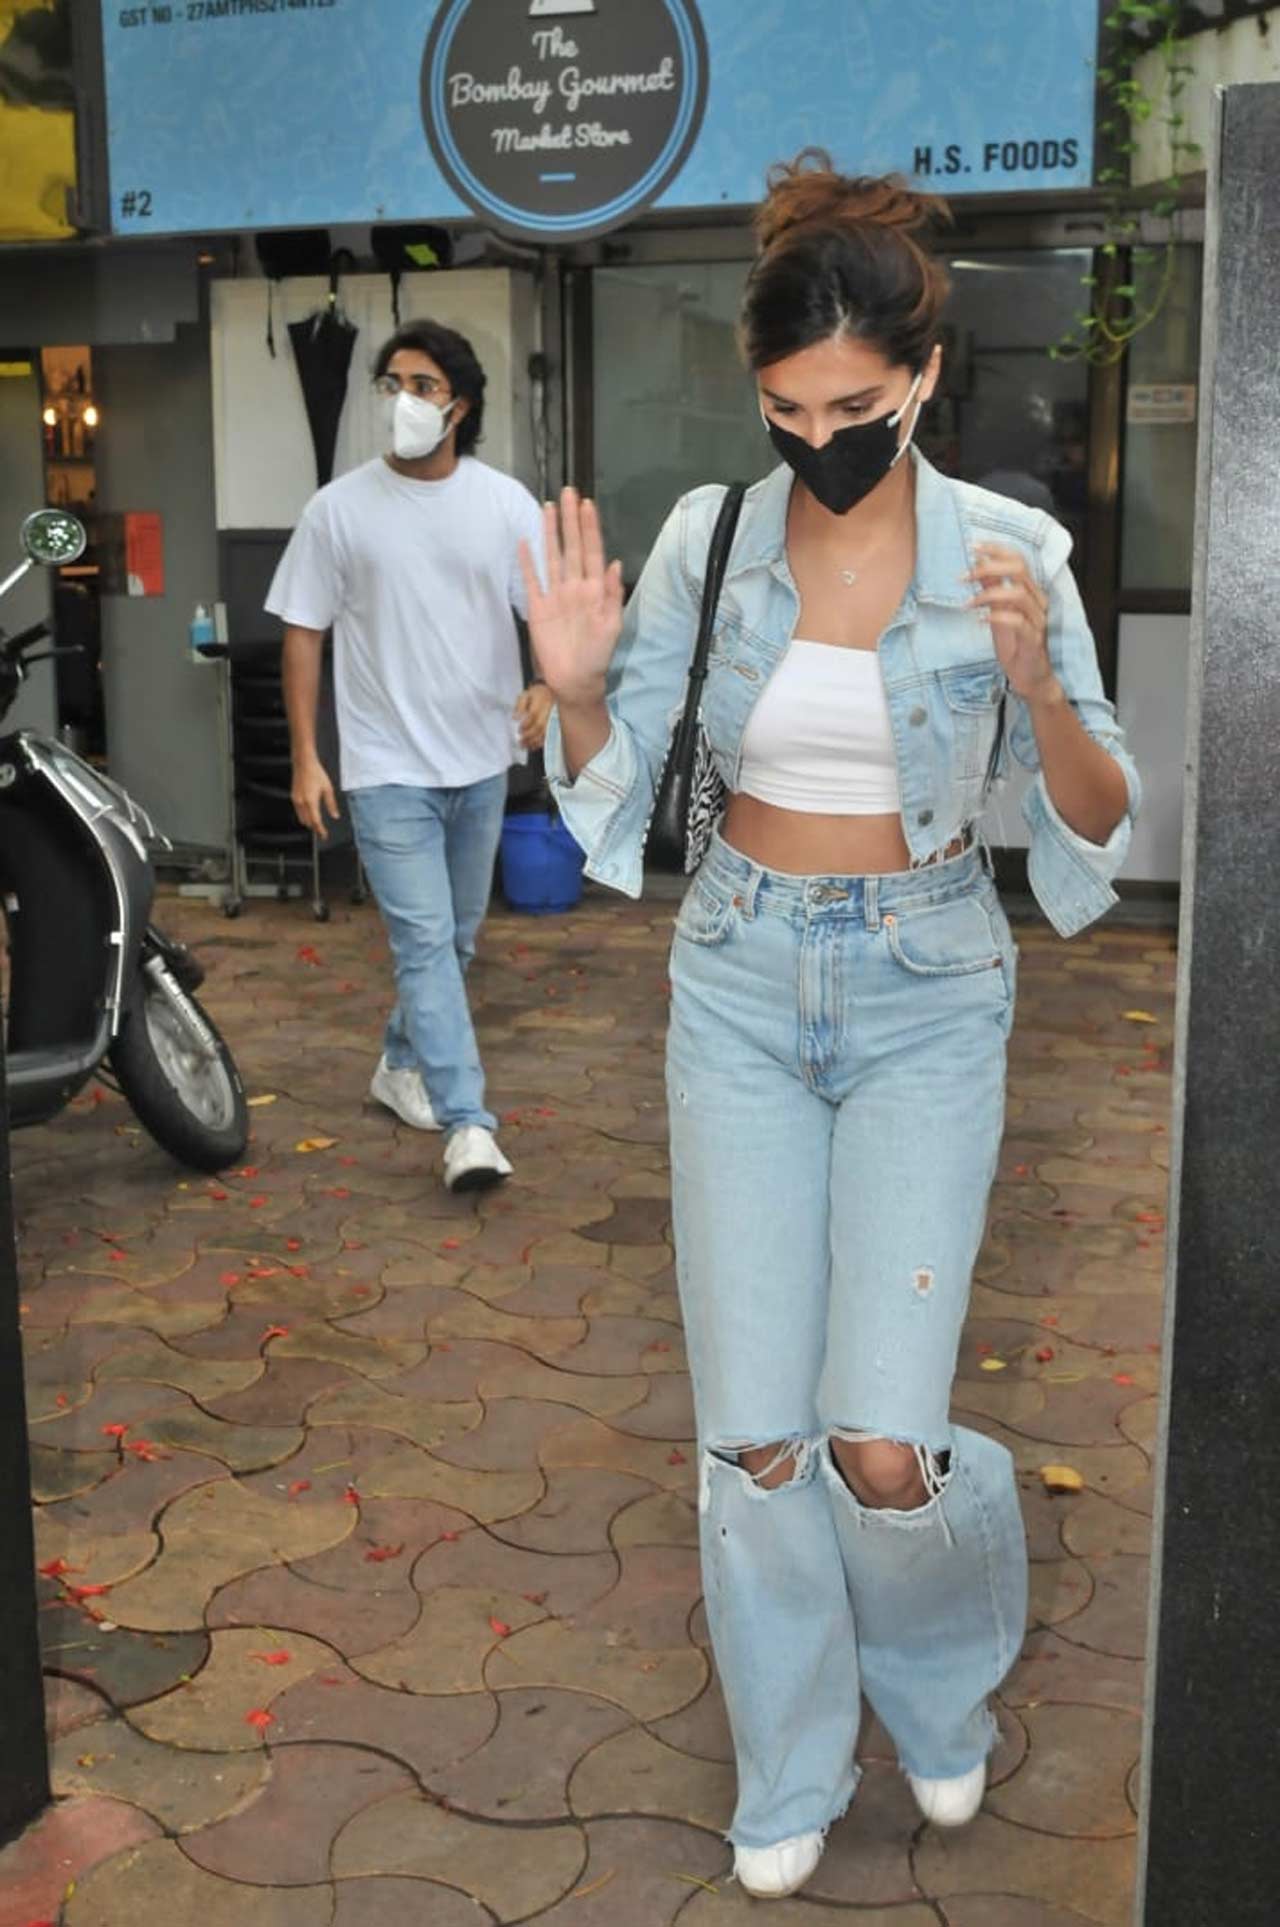 Bollywood couple Tara Sutaria and Aadar Jain were also spotted and papped together and what caught the attention was the casual yet stylish outfit of the 'Marjaavaan' actress. She will now been seen in Mohit Suri's 'Ek Villain Returns'. Also featuring John Abraham, Arjun Kapoor, Disha Patani in pivotal roles, the film releases on February 11, 2022.